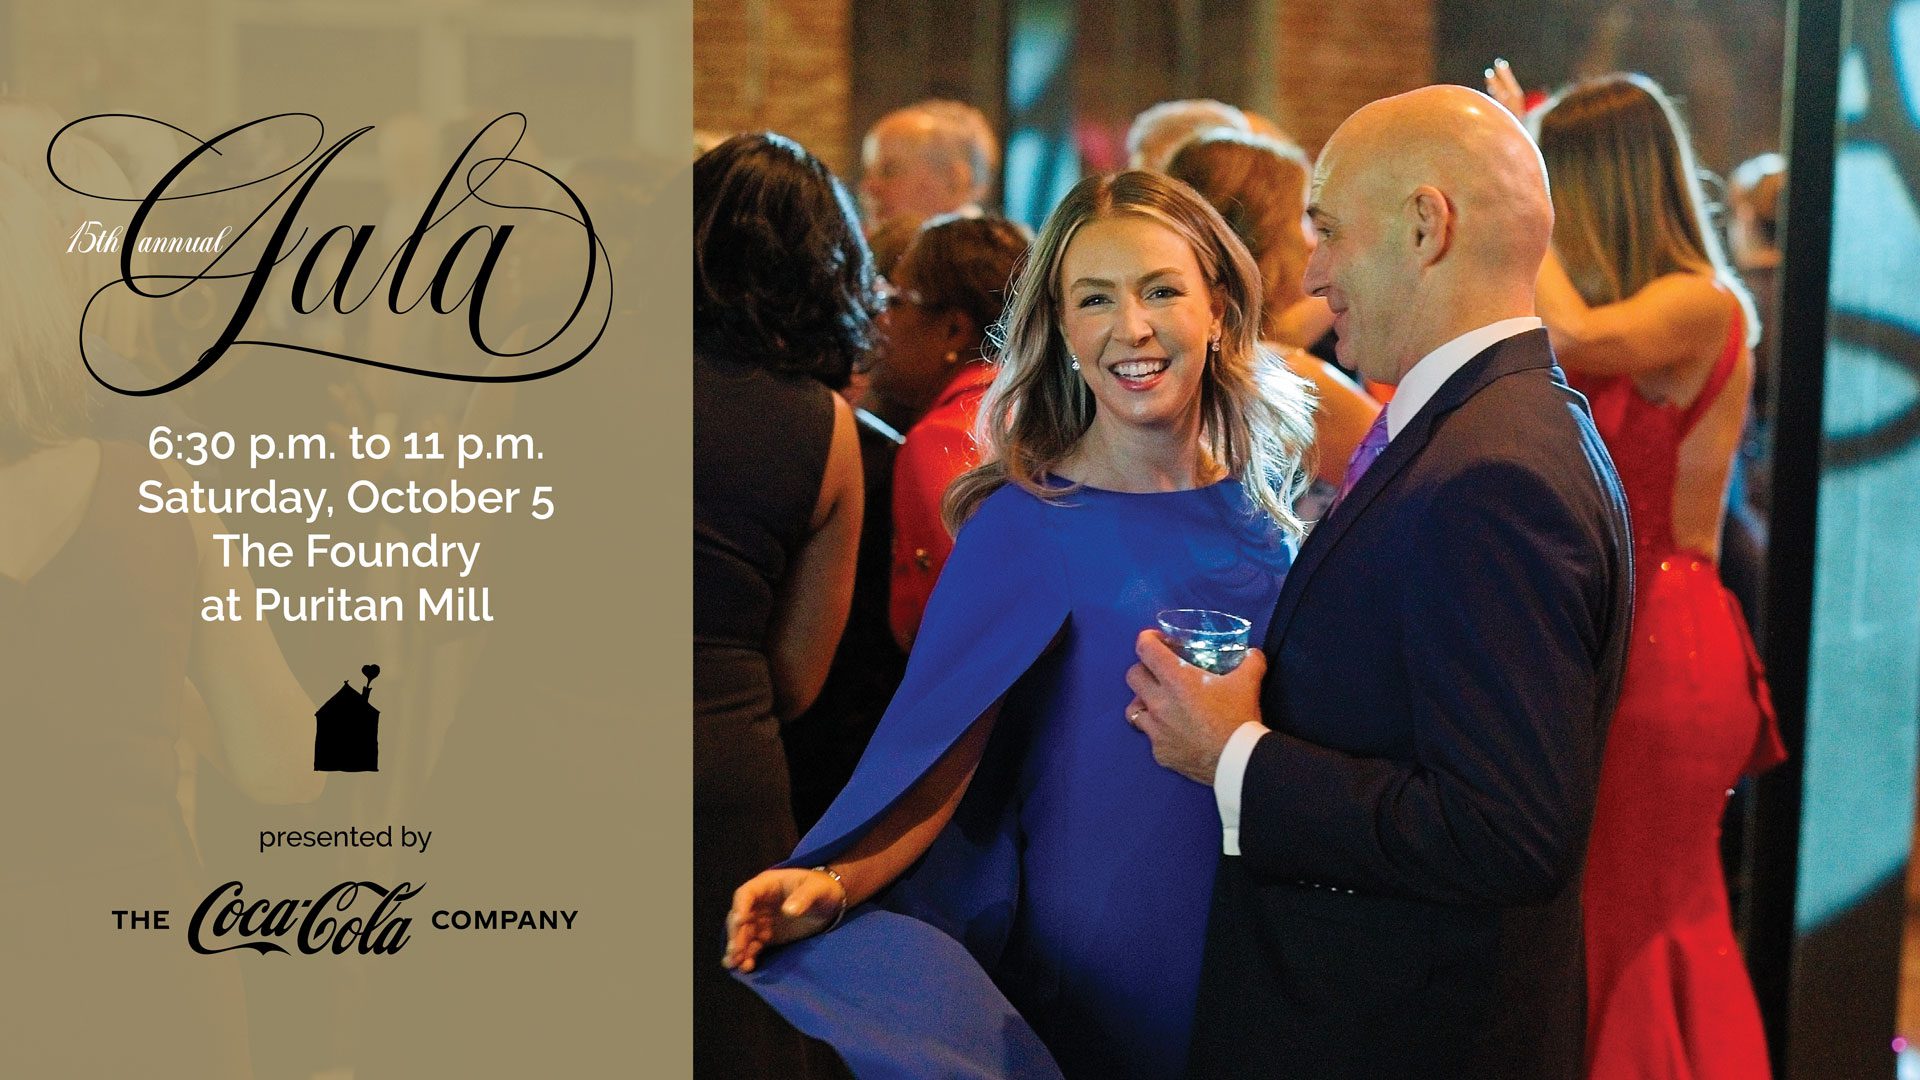 15th Annual Gala save the date banner